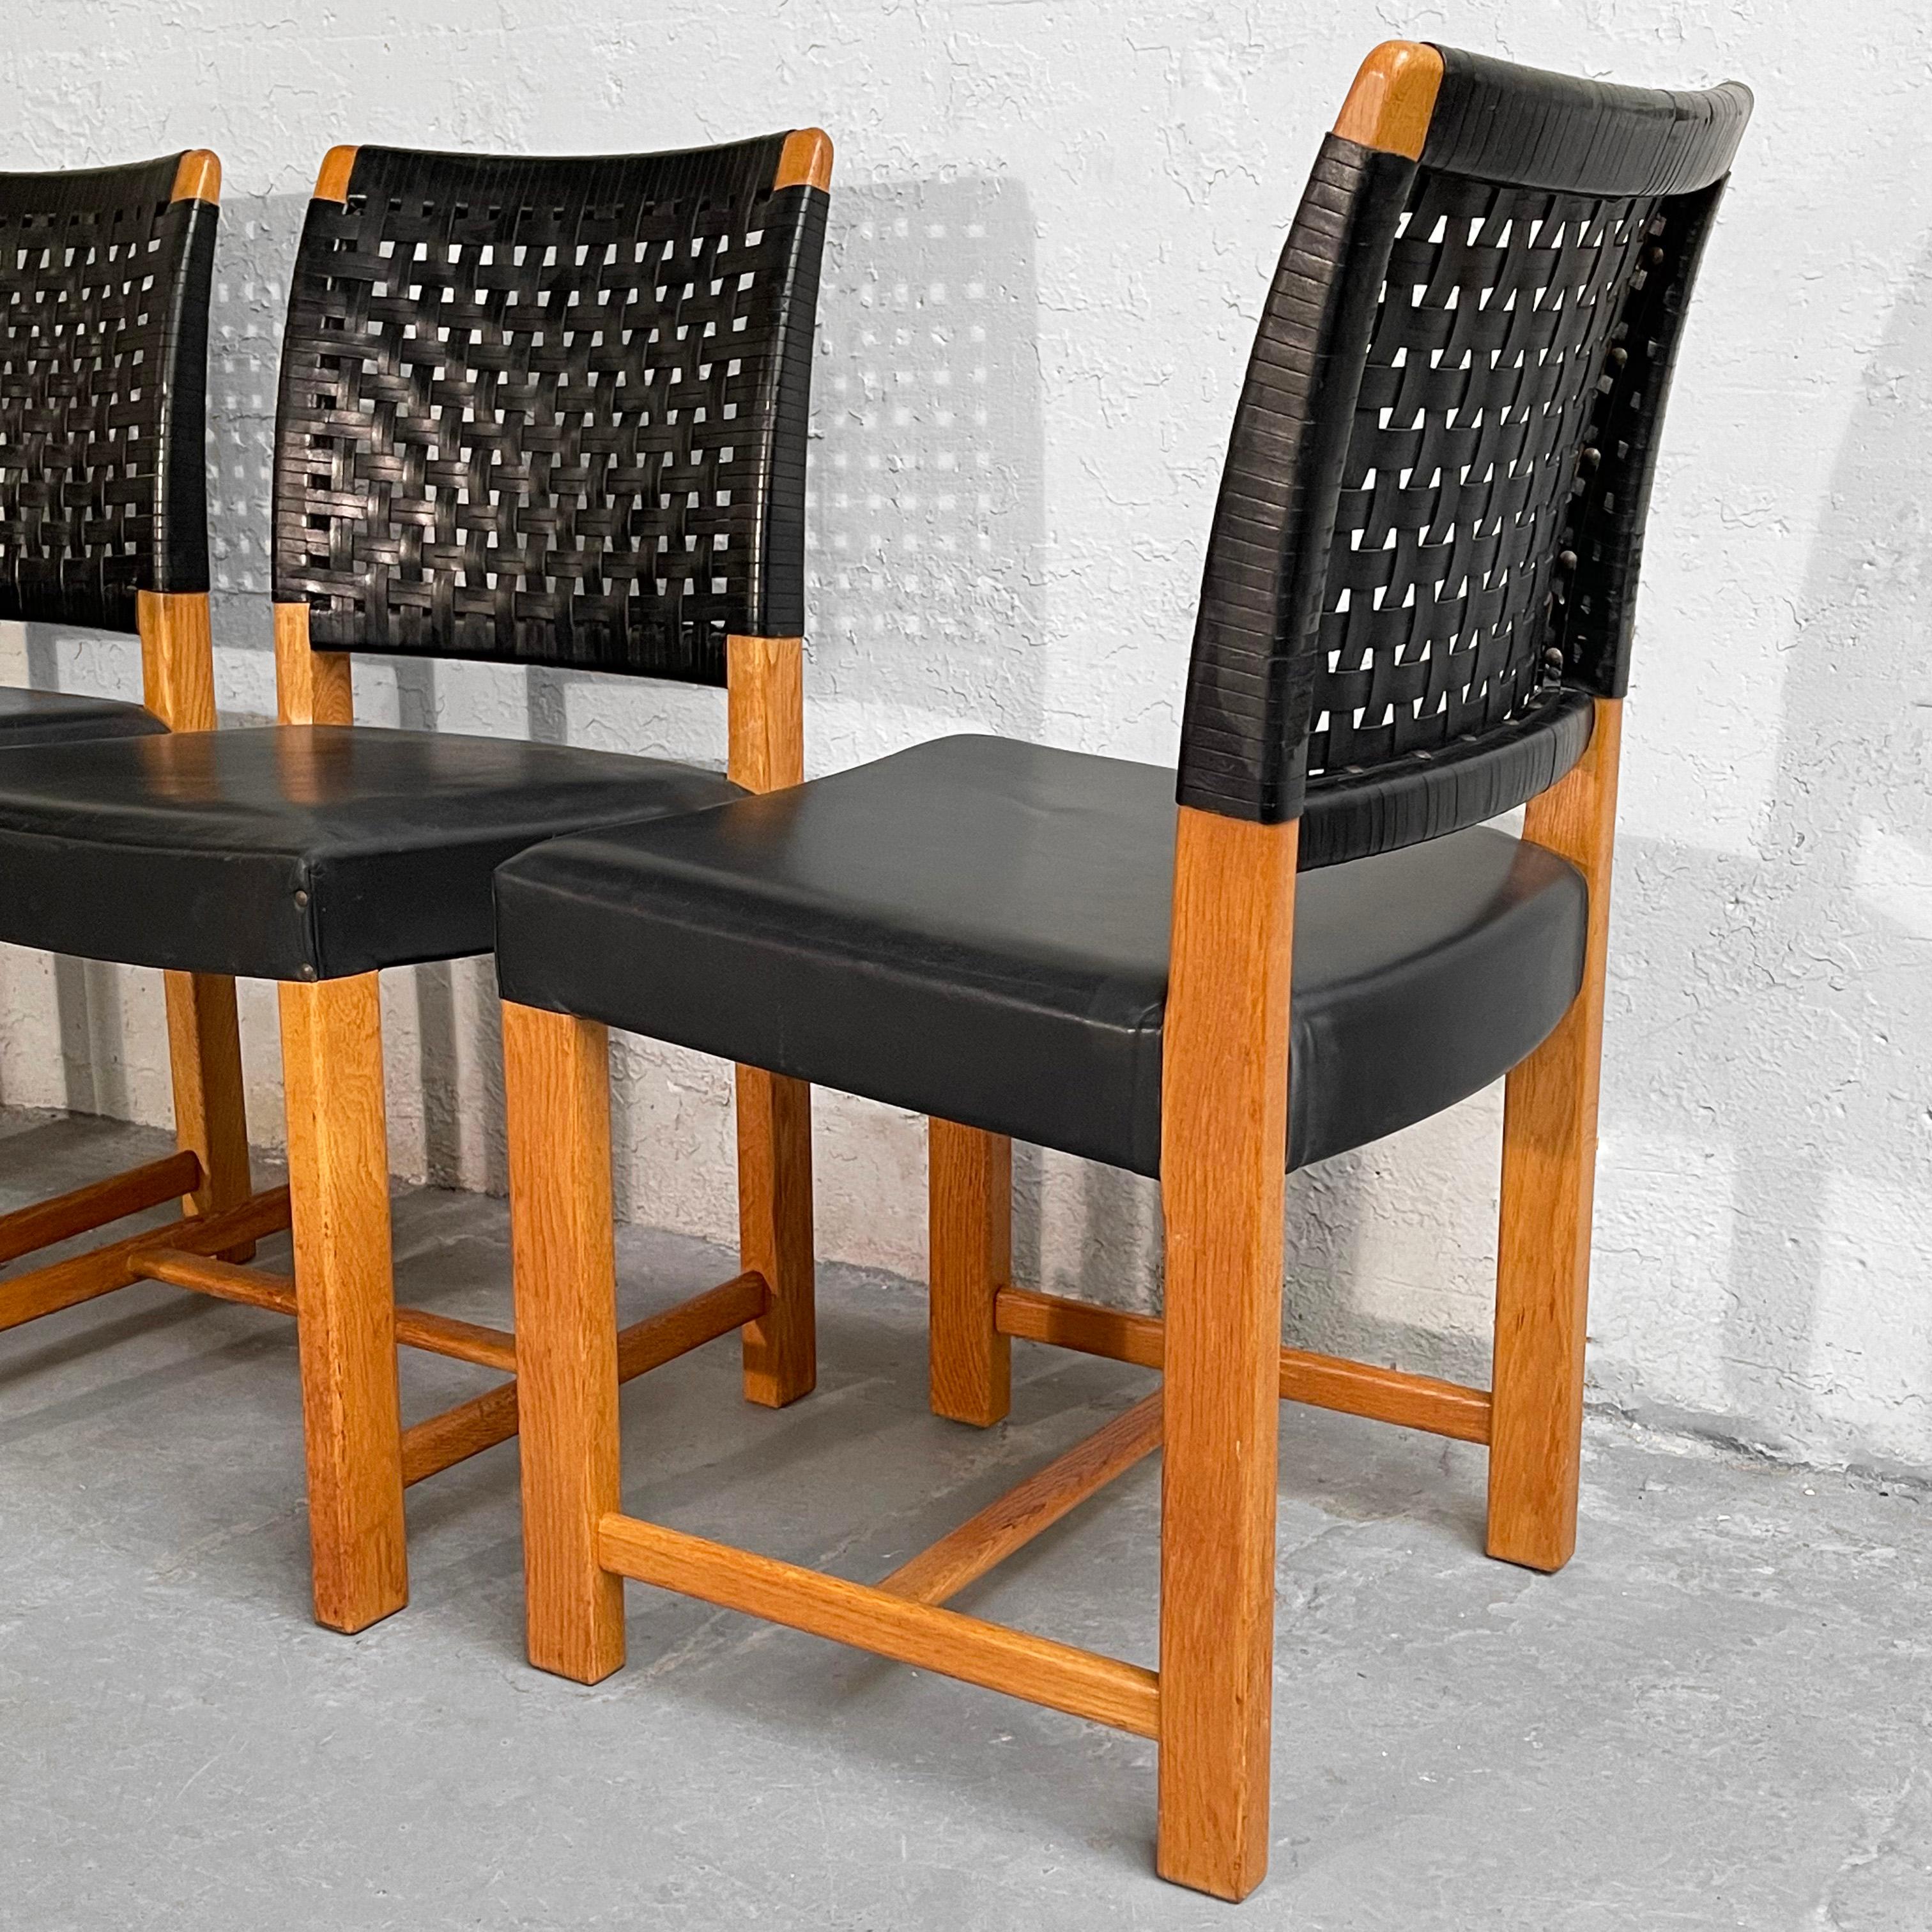 20th Century Swedish Mid-Century Modern Black Woven Leather Dining Chairs For Sale